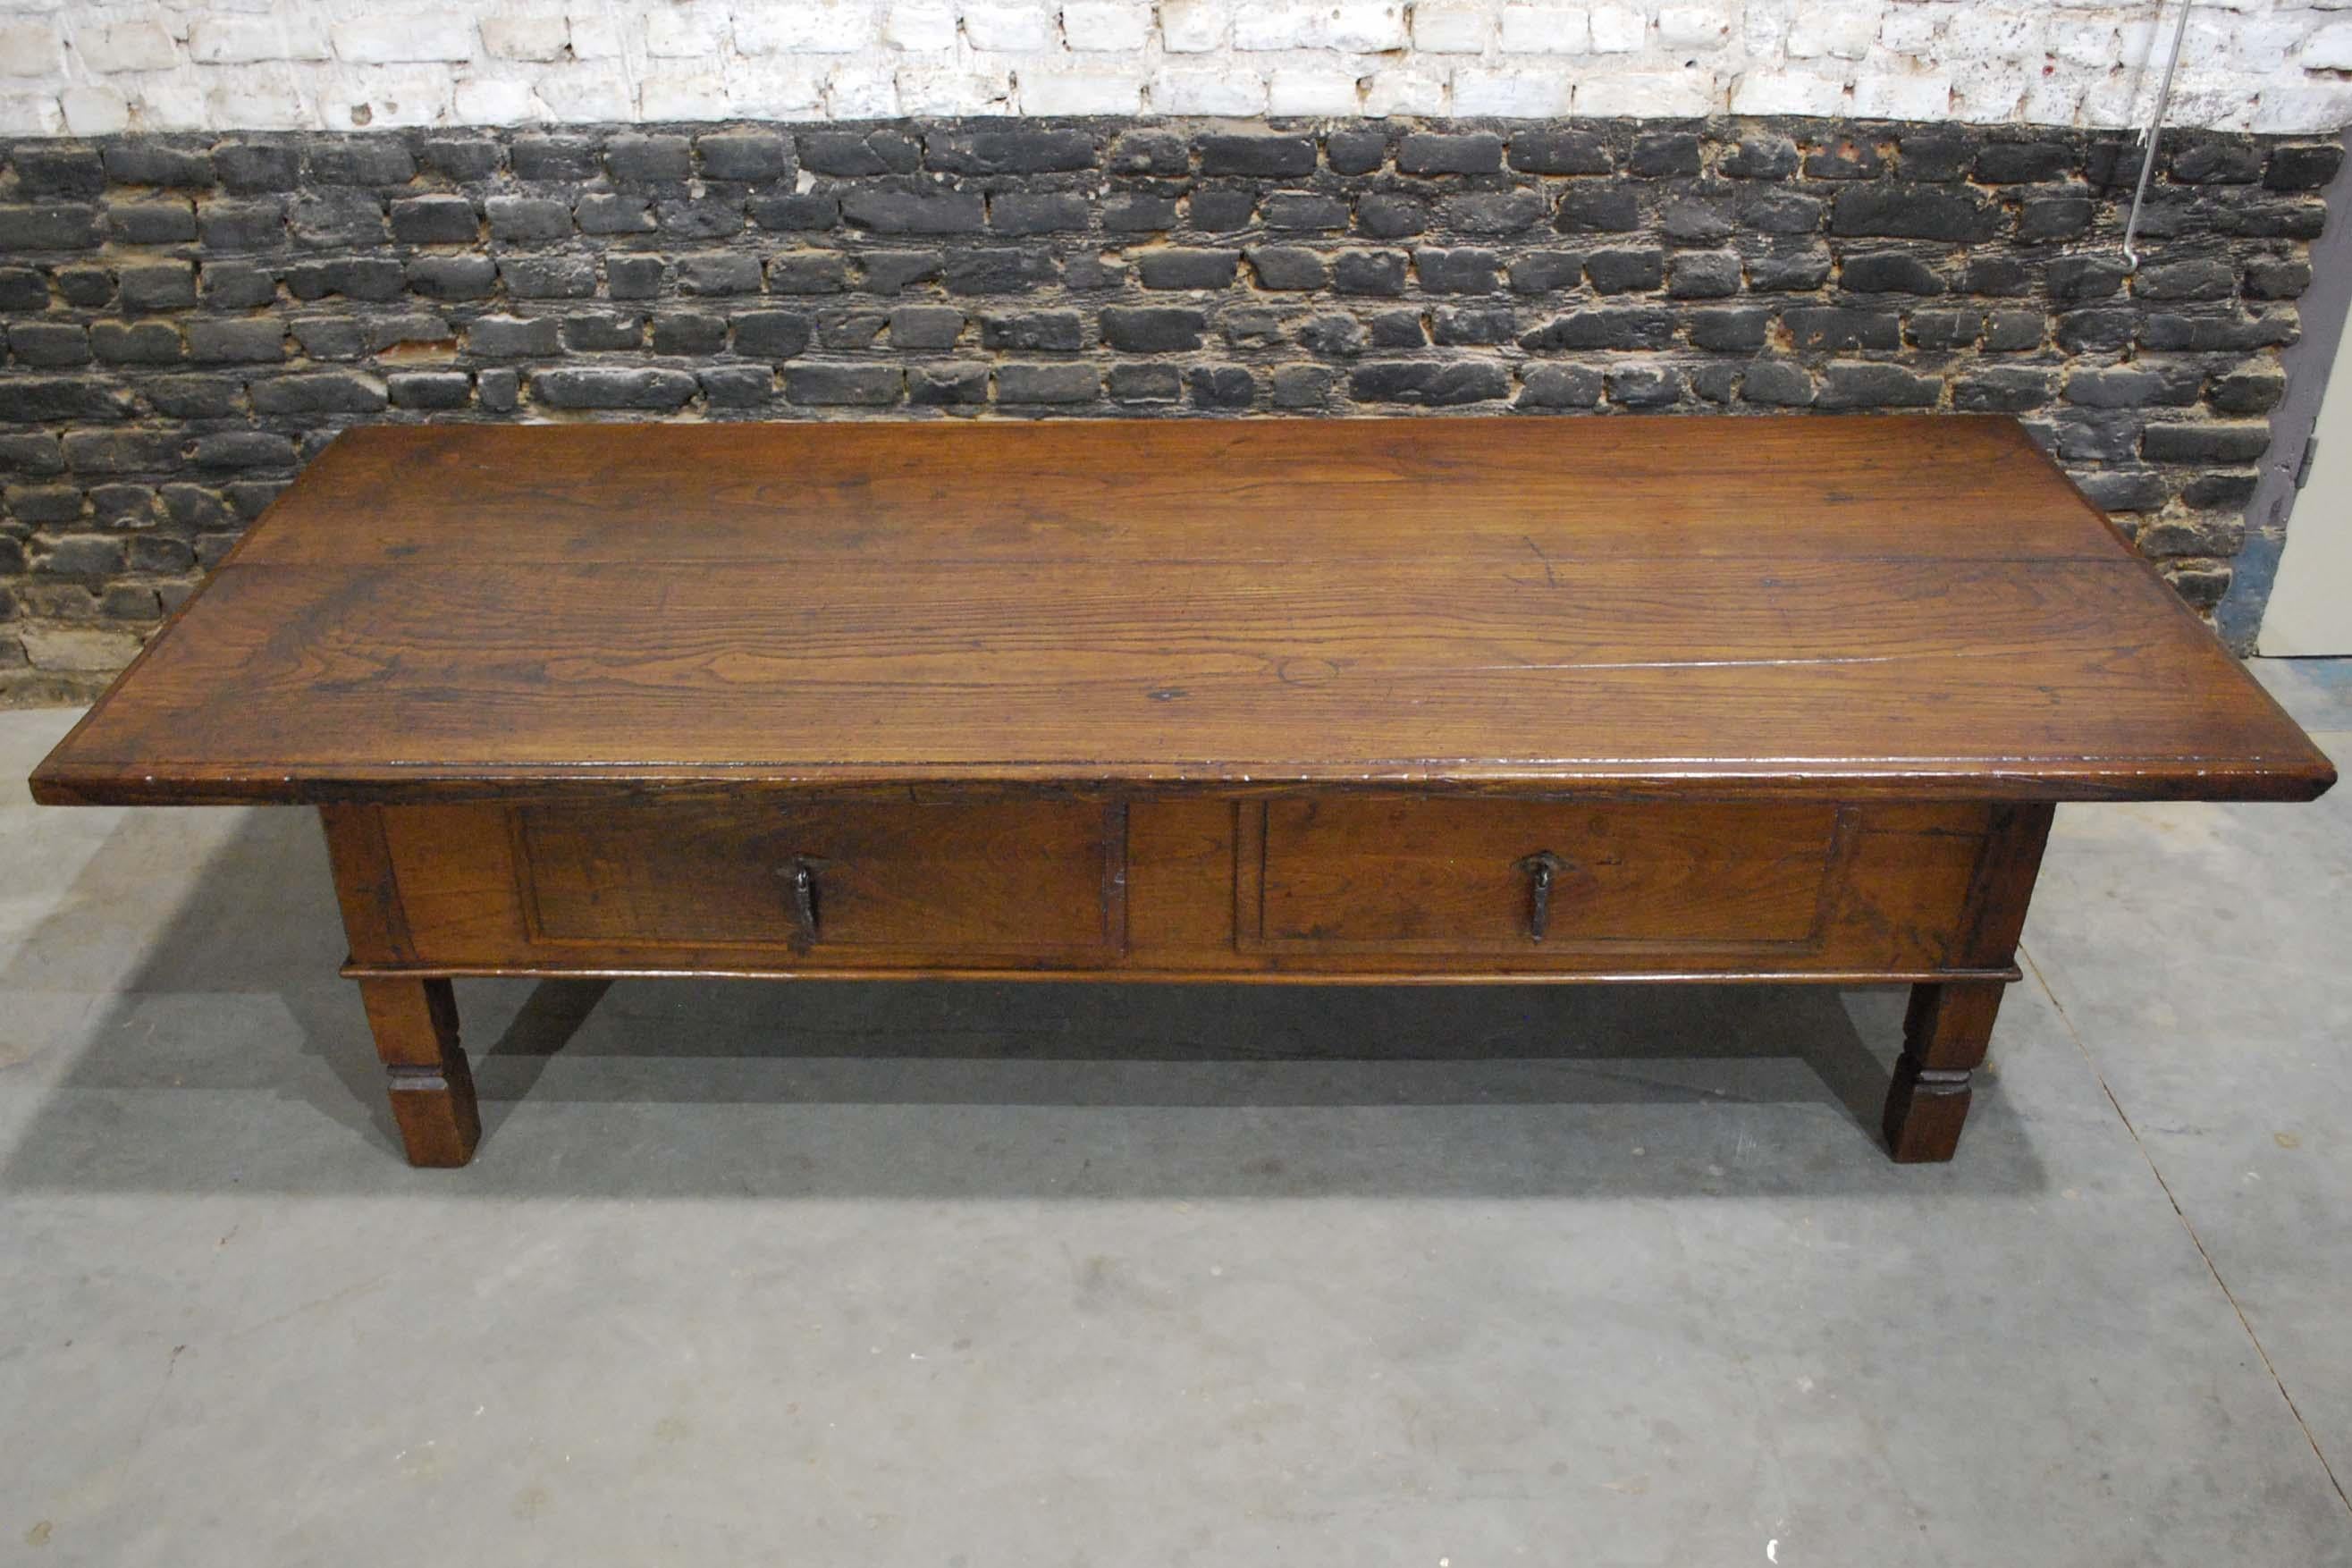 A beautiful rustic mid-18th century low table or coffee table that originates in Spain.
The table is completely made in solid chestnut wood. The 1.18 inch thick top is made of two pieces of timber. The wood shows a remarkably fine wood grain